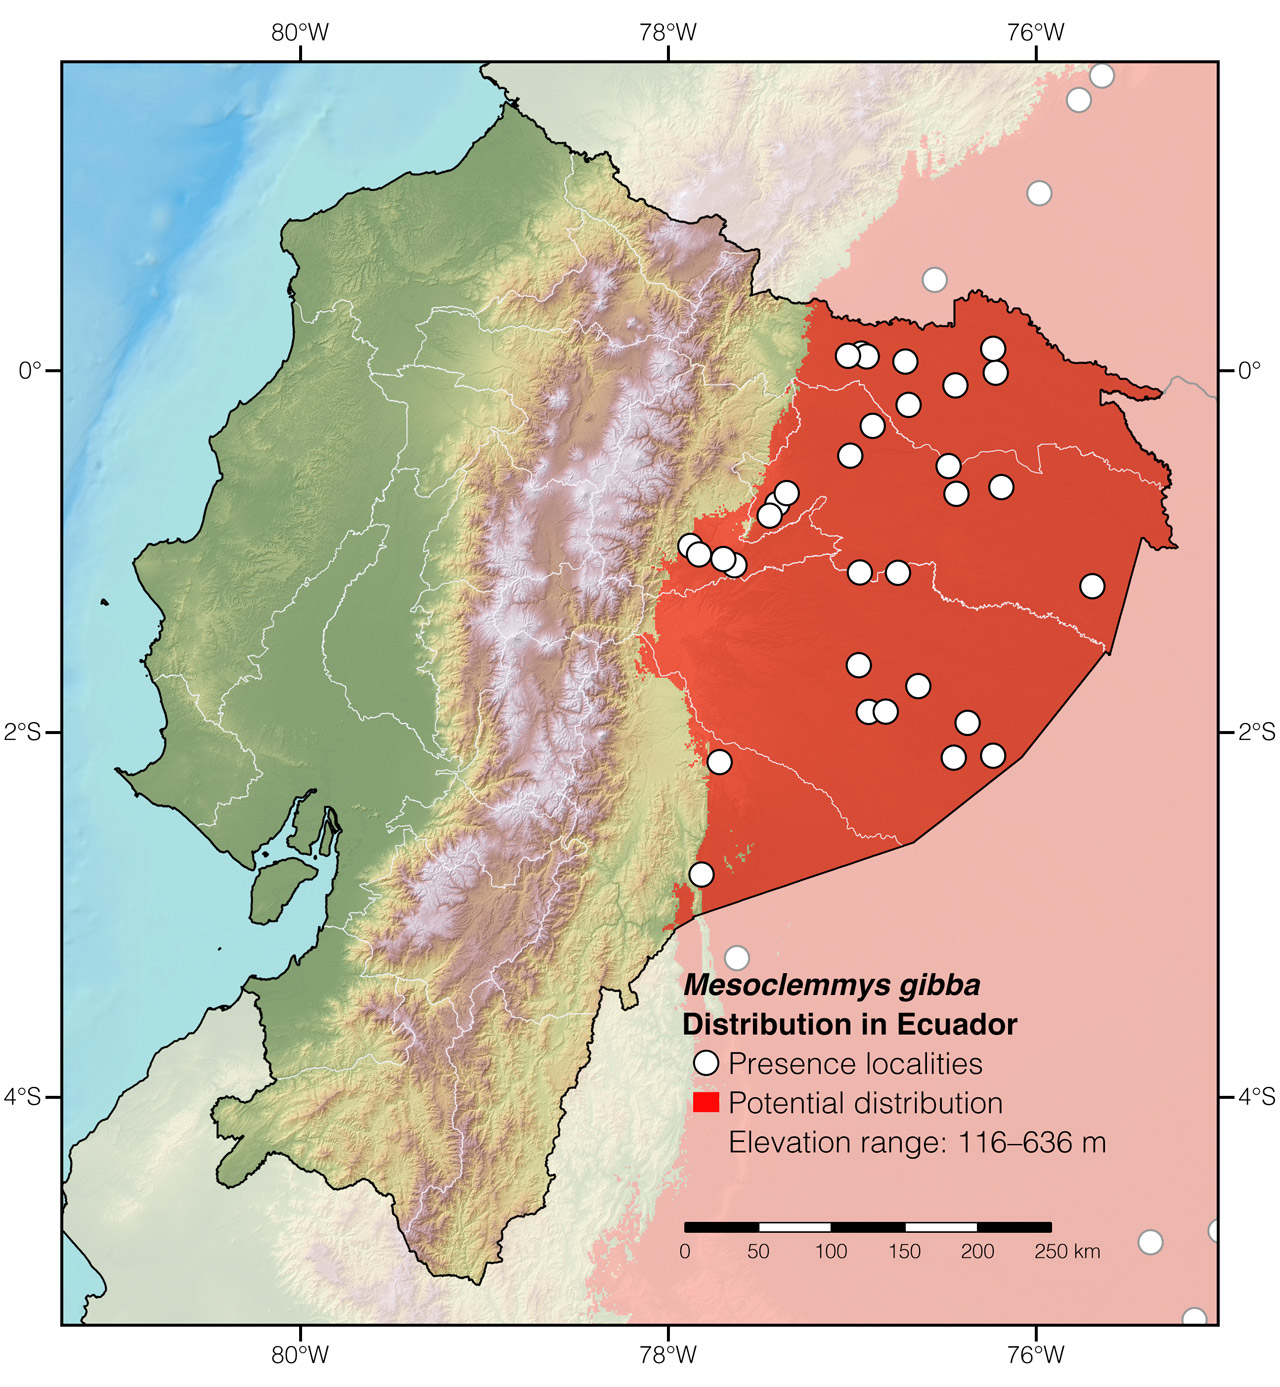 Distribution of Mesoclemmys gibba in Ecuador